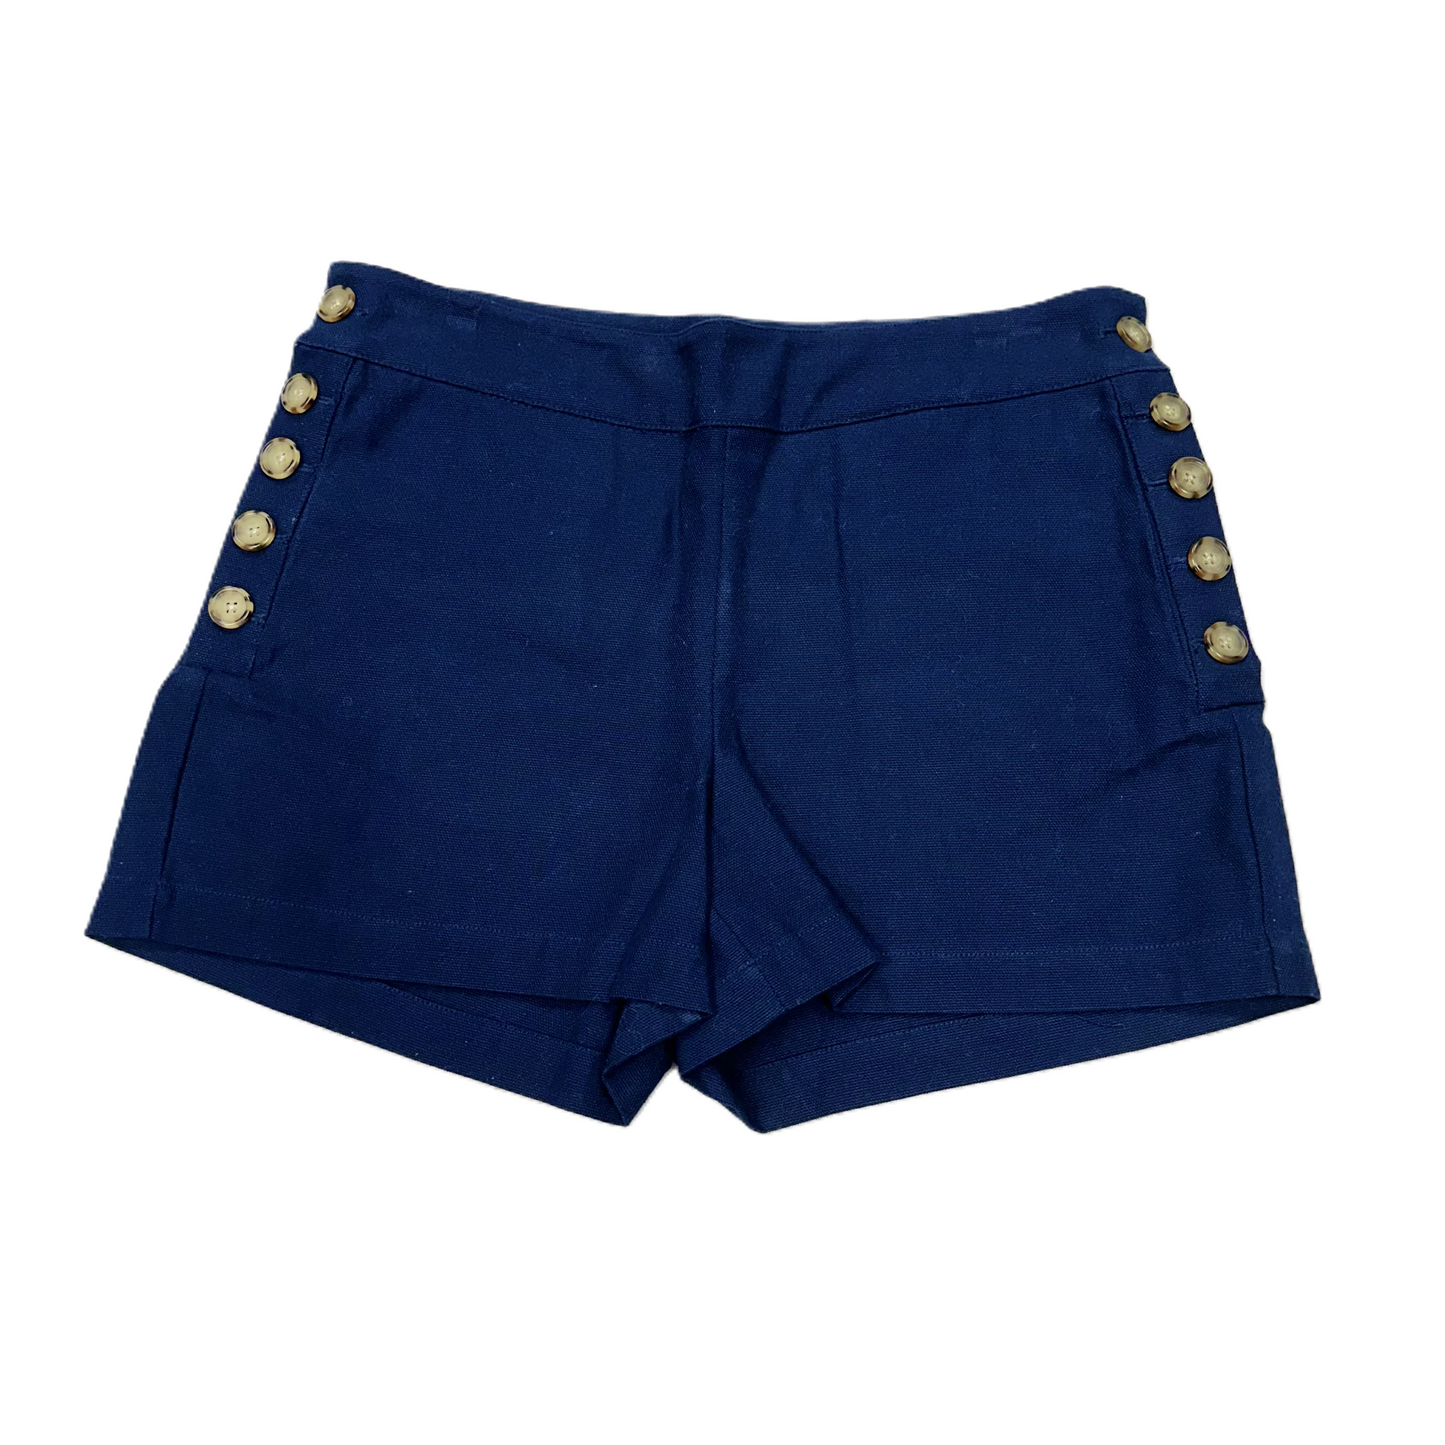 Navy Shorts By Marie Oliver, Size: 4